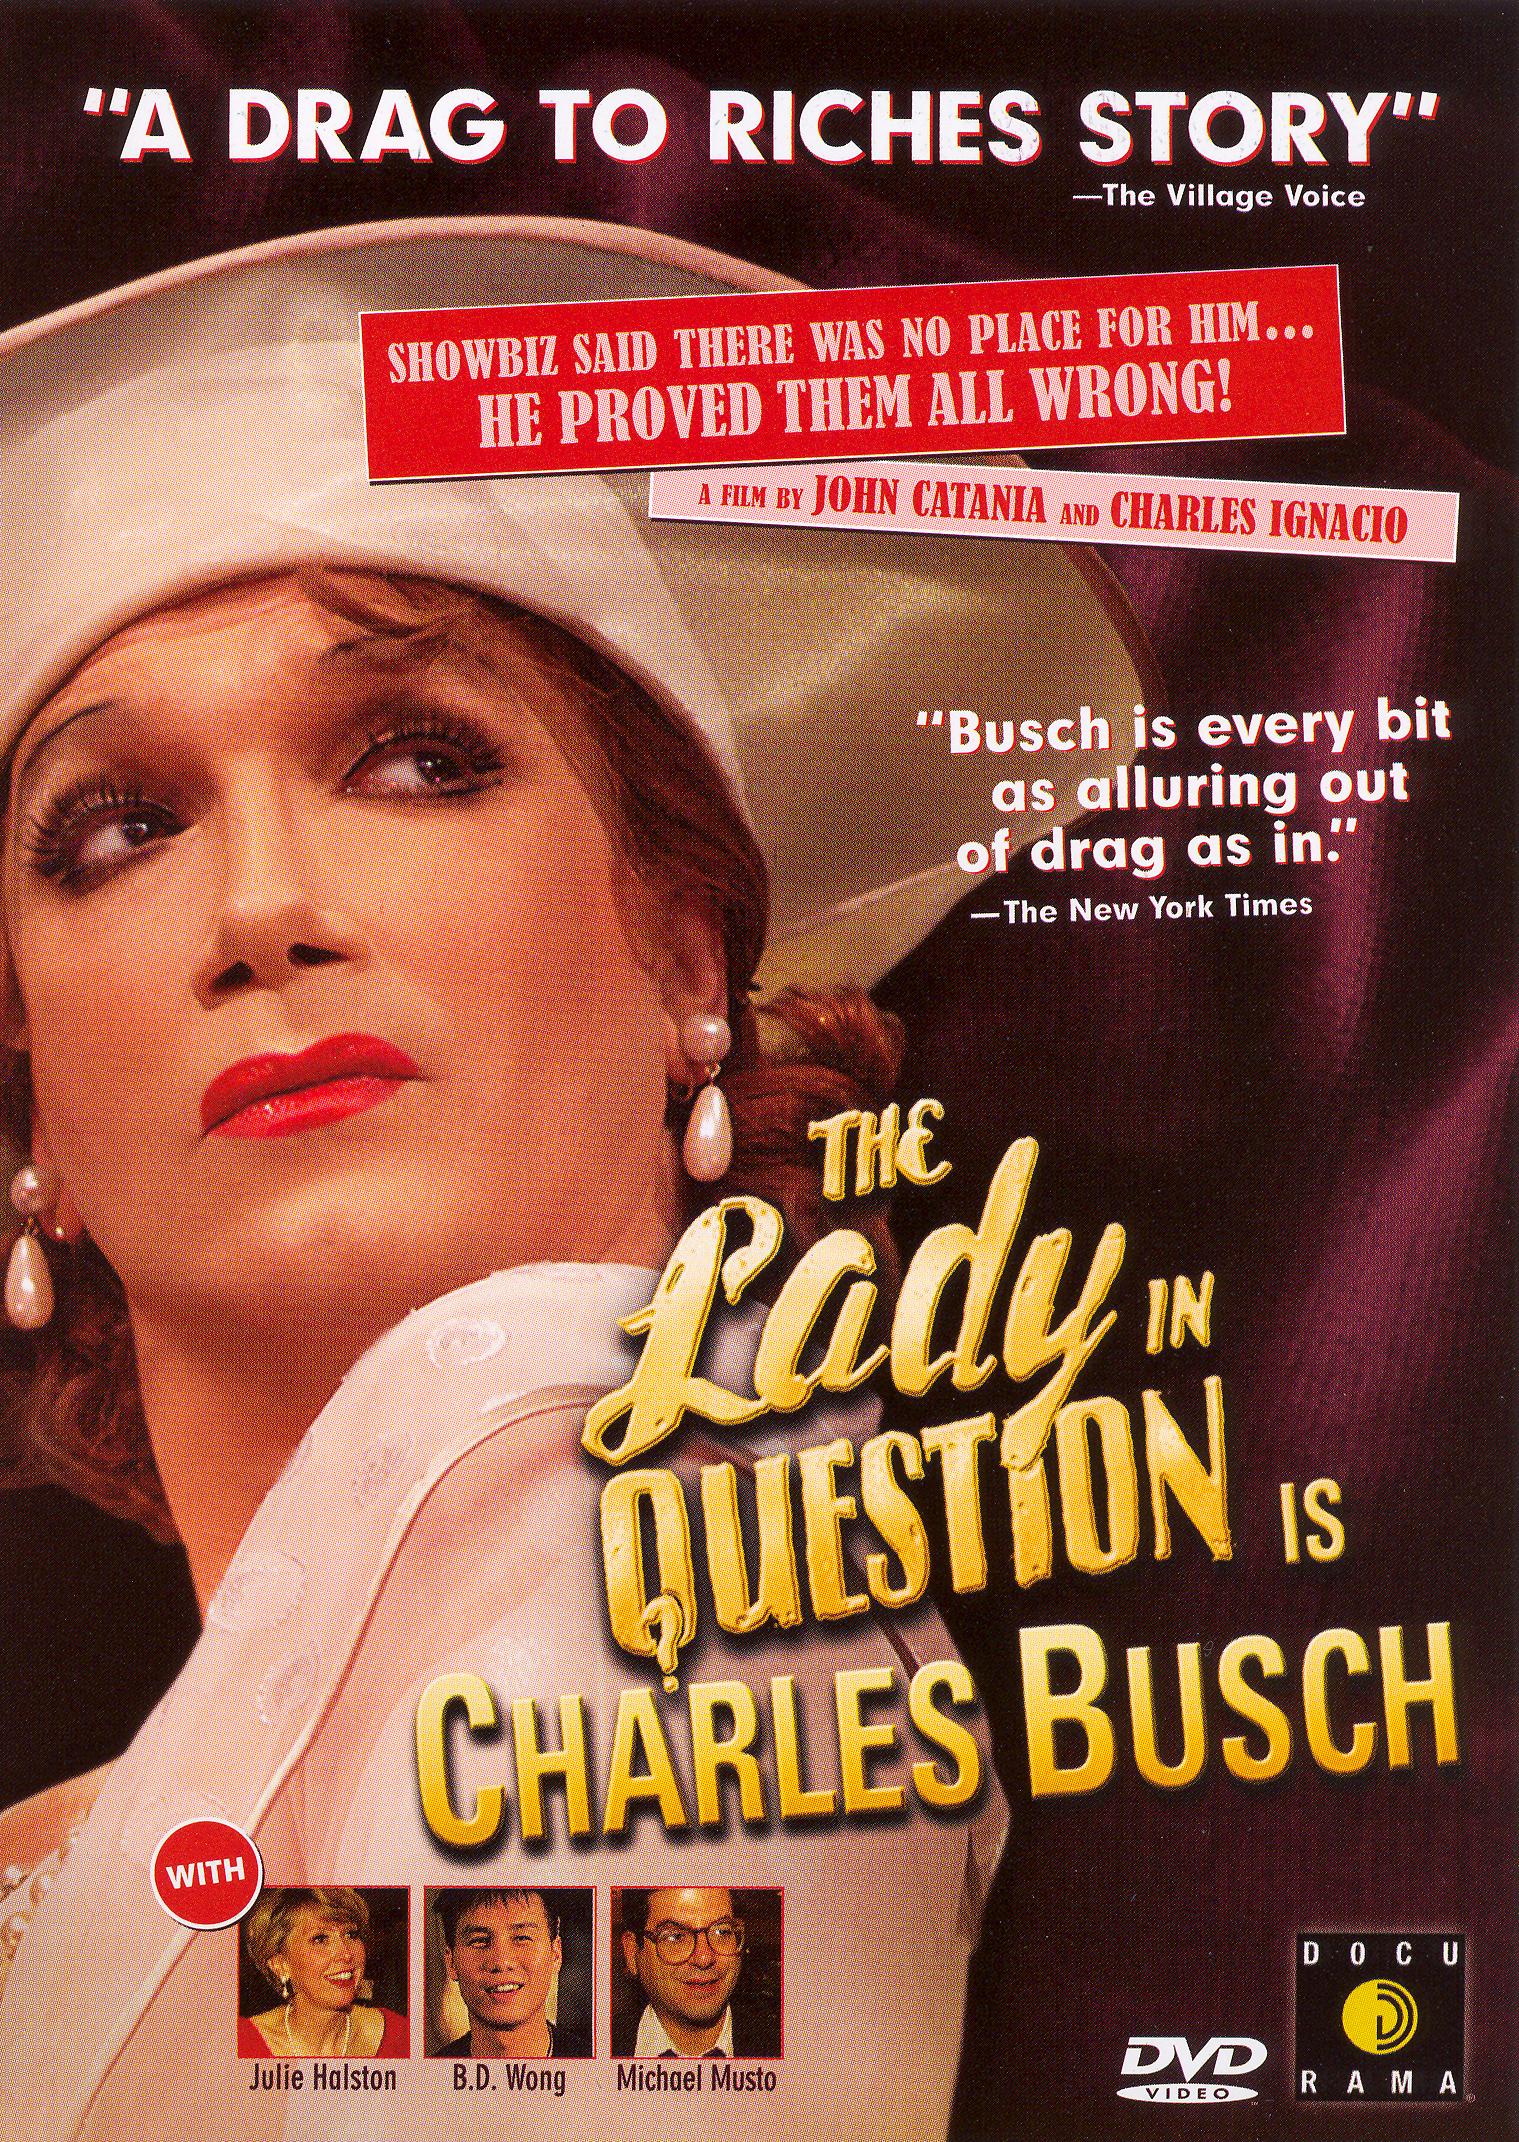 Lady in Question Is Charles Busch [DVD](品) (shin-